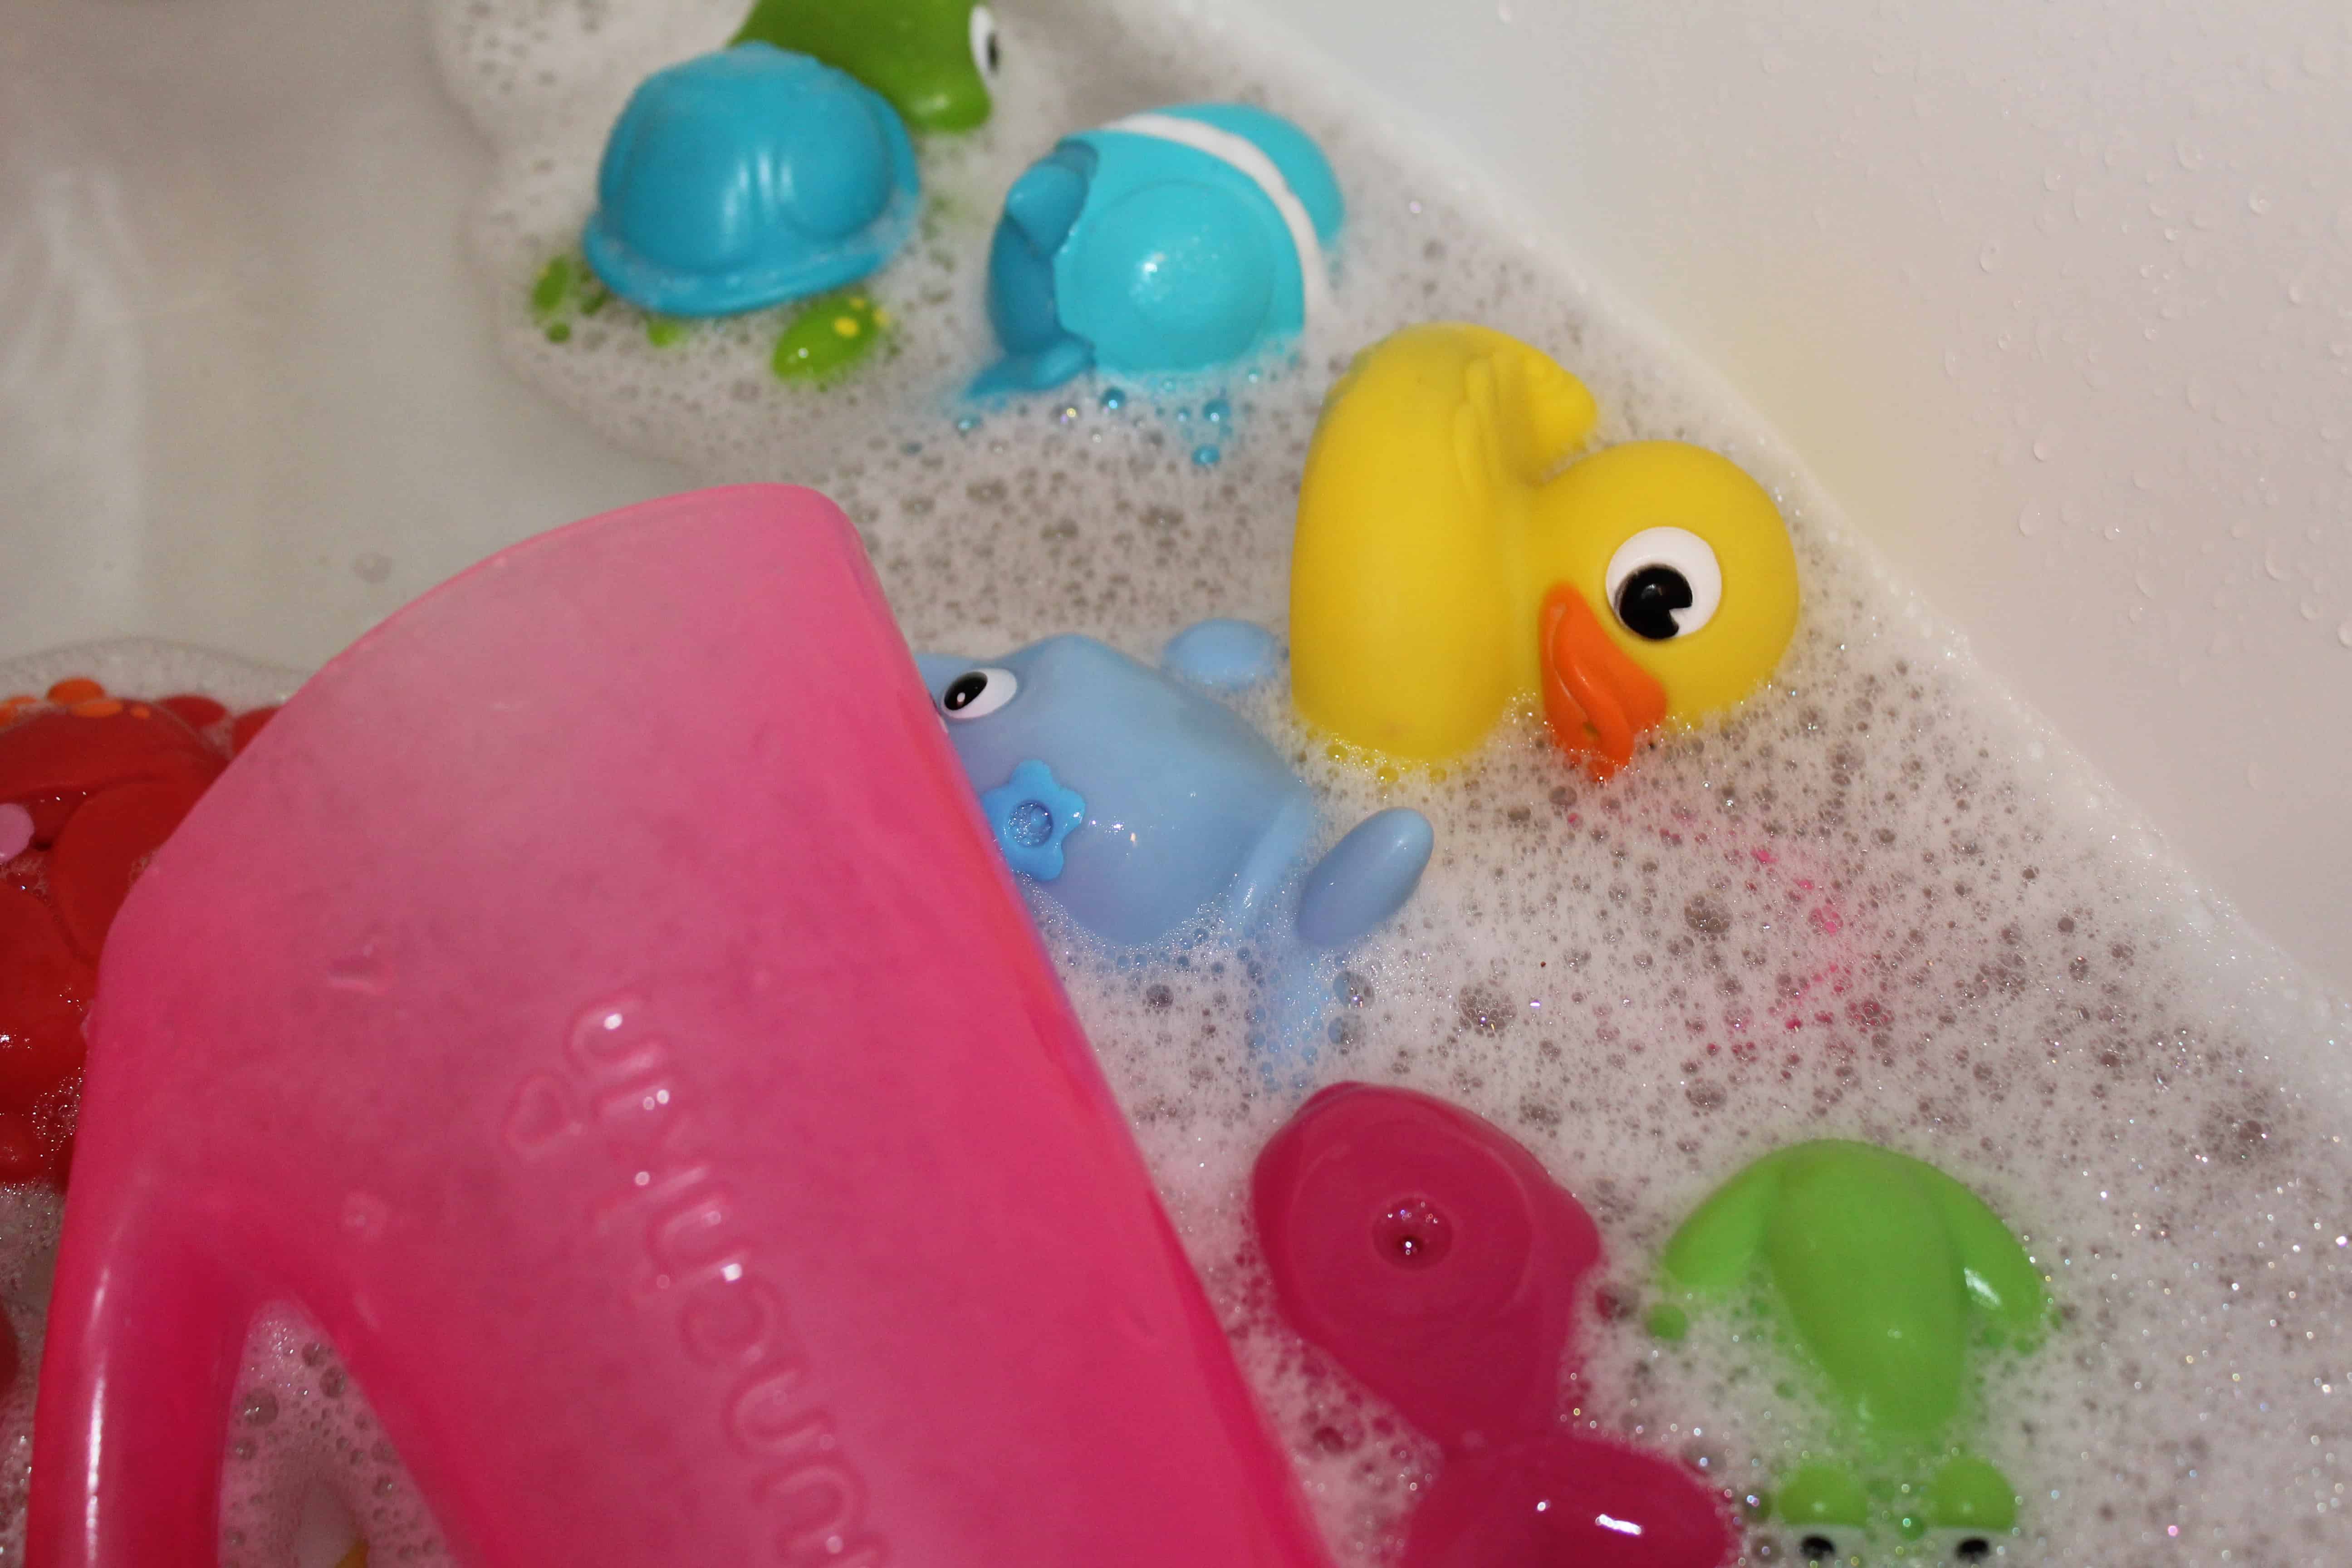 Bathtub toys in soapy water